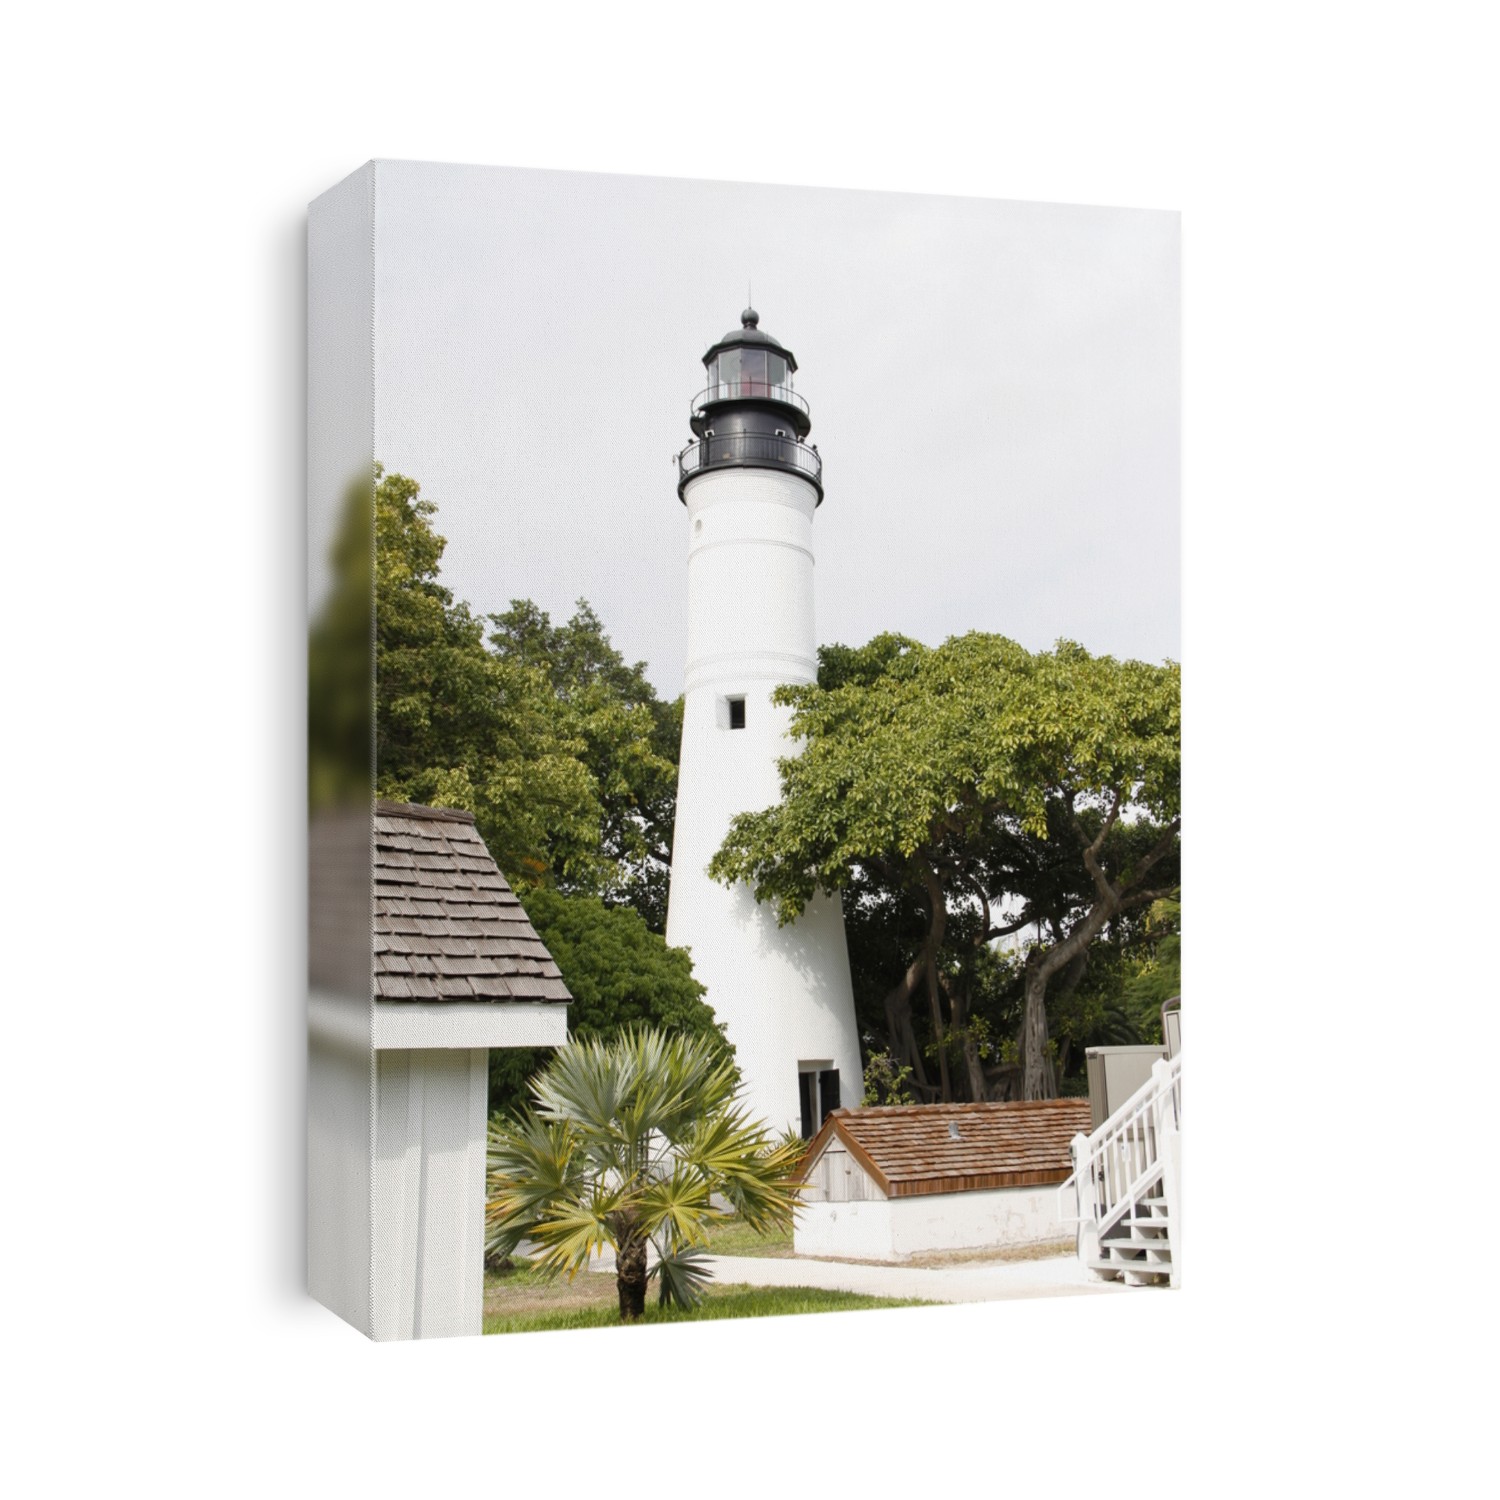 Historic Key West lighthouse located in Key West, Florida serving as a museum